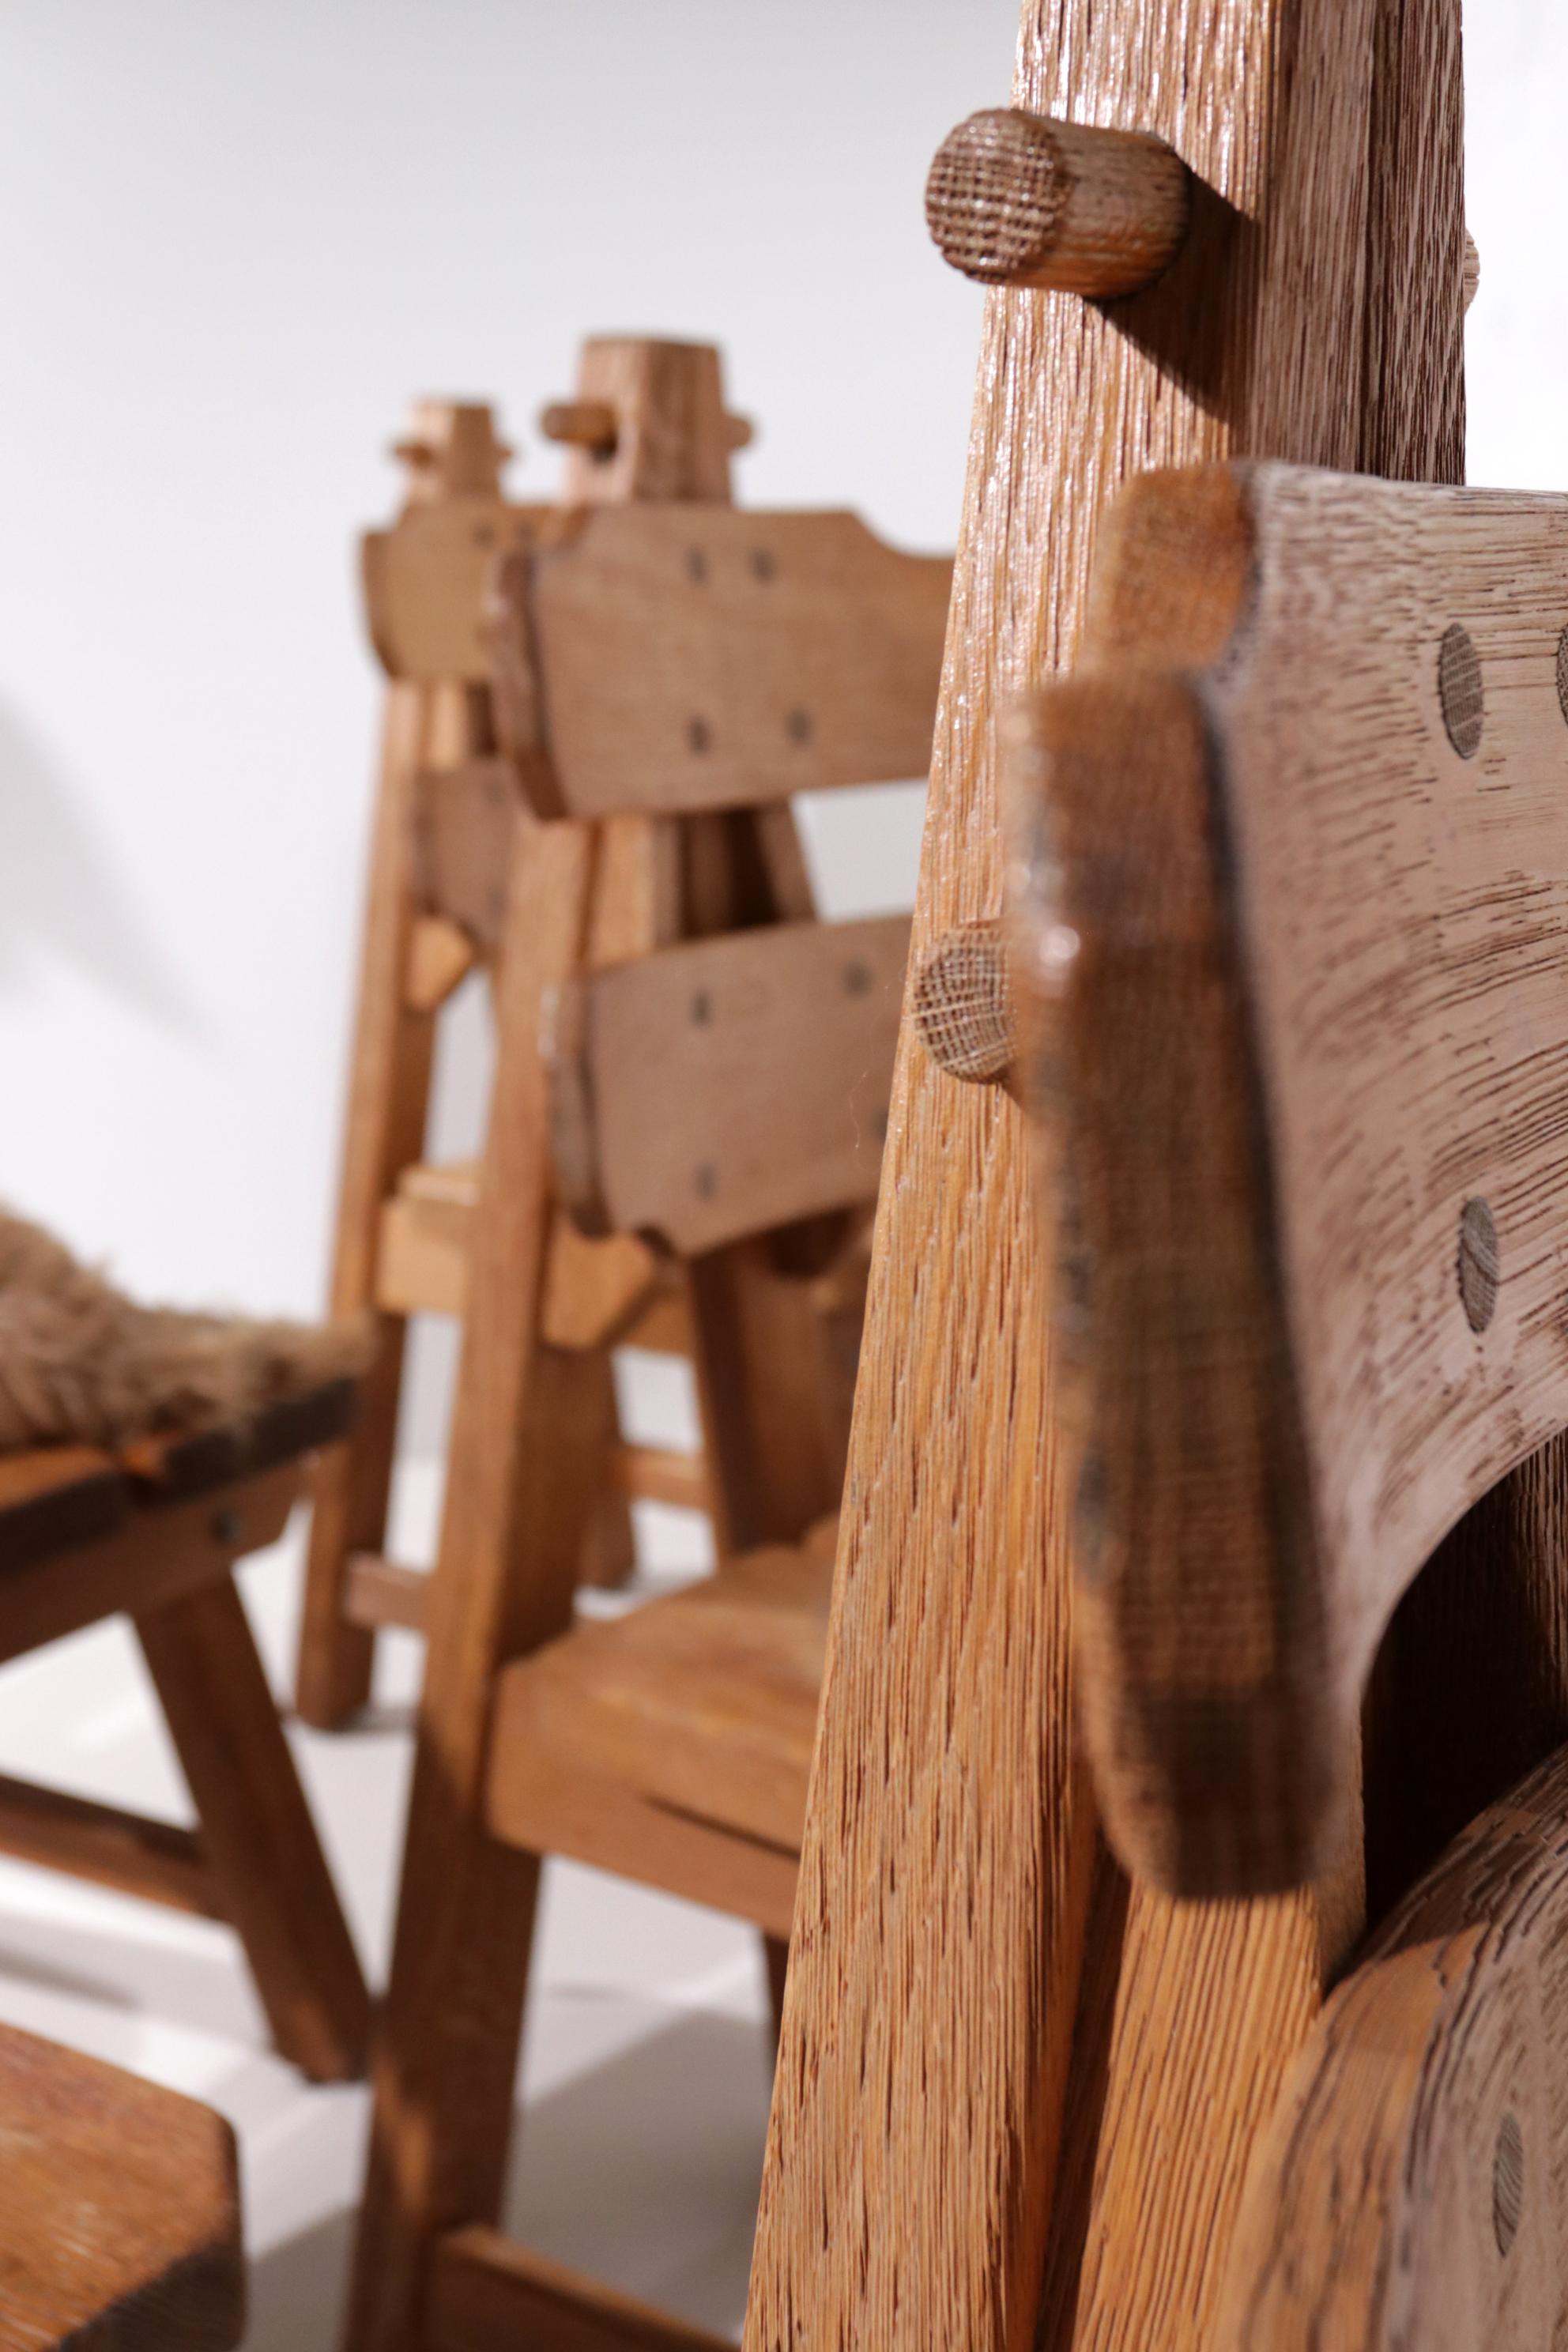 Set of 6 Brutalist Chairs, Solid Oak, Spain, 1970s For Sale 10